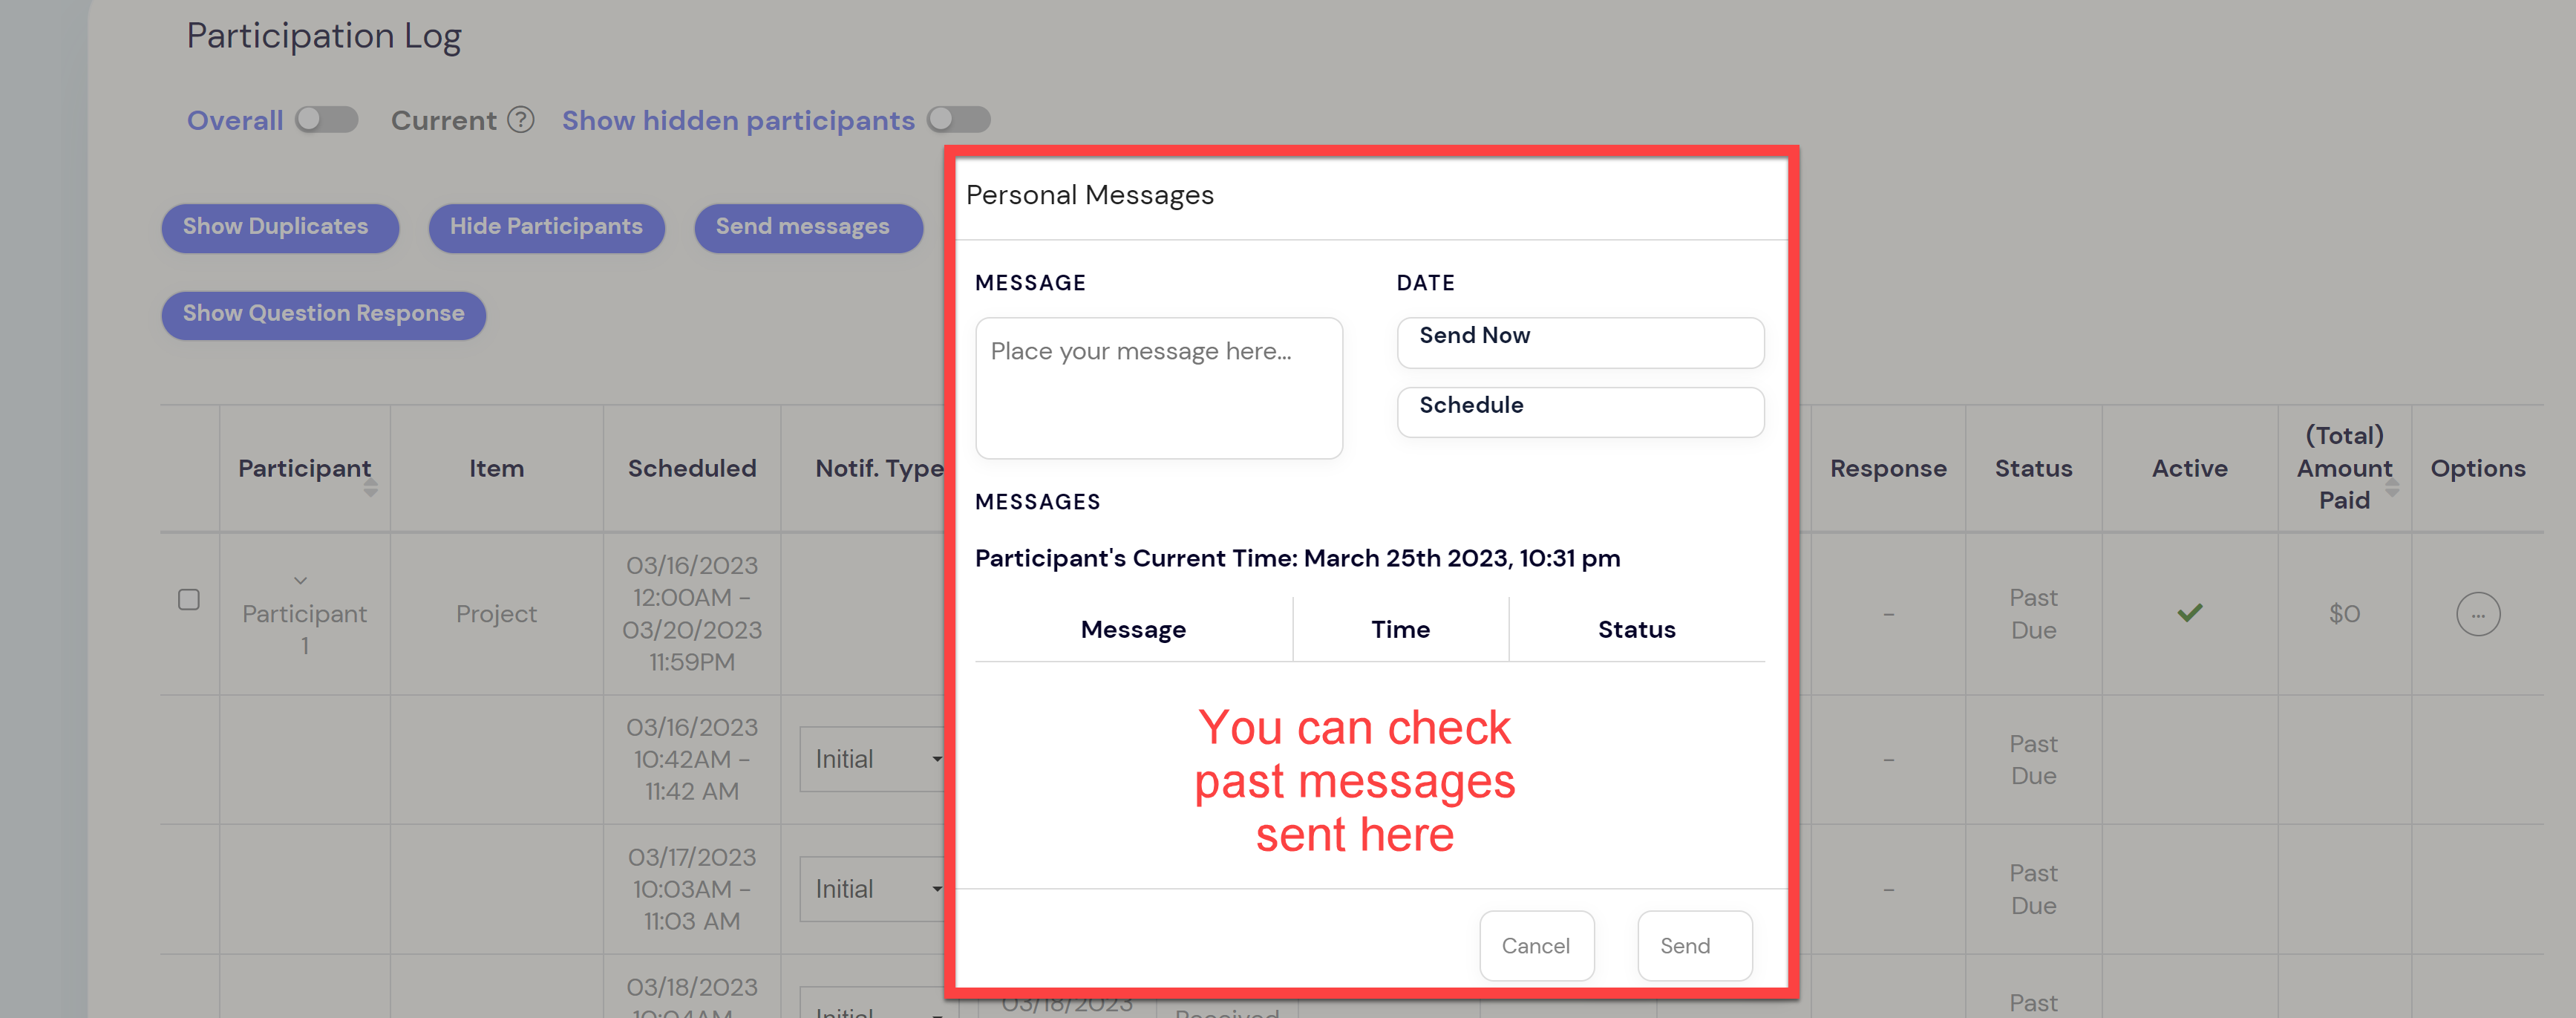 Log for Individual Message